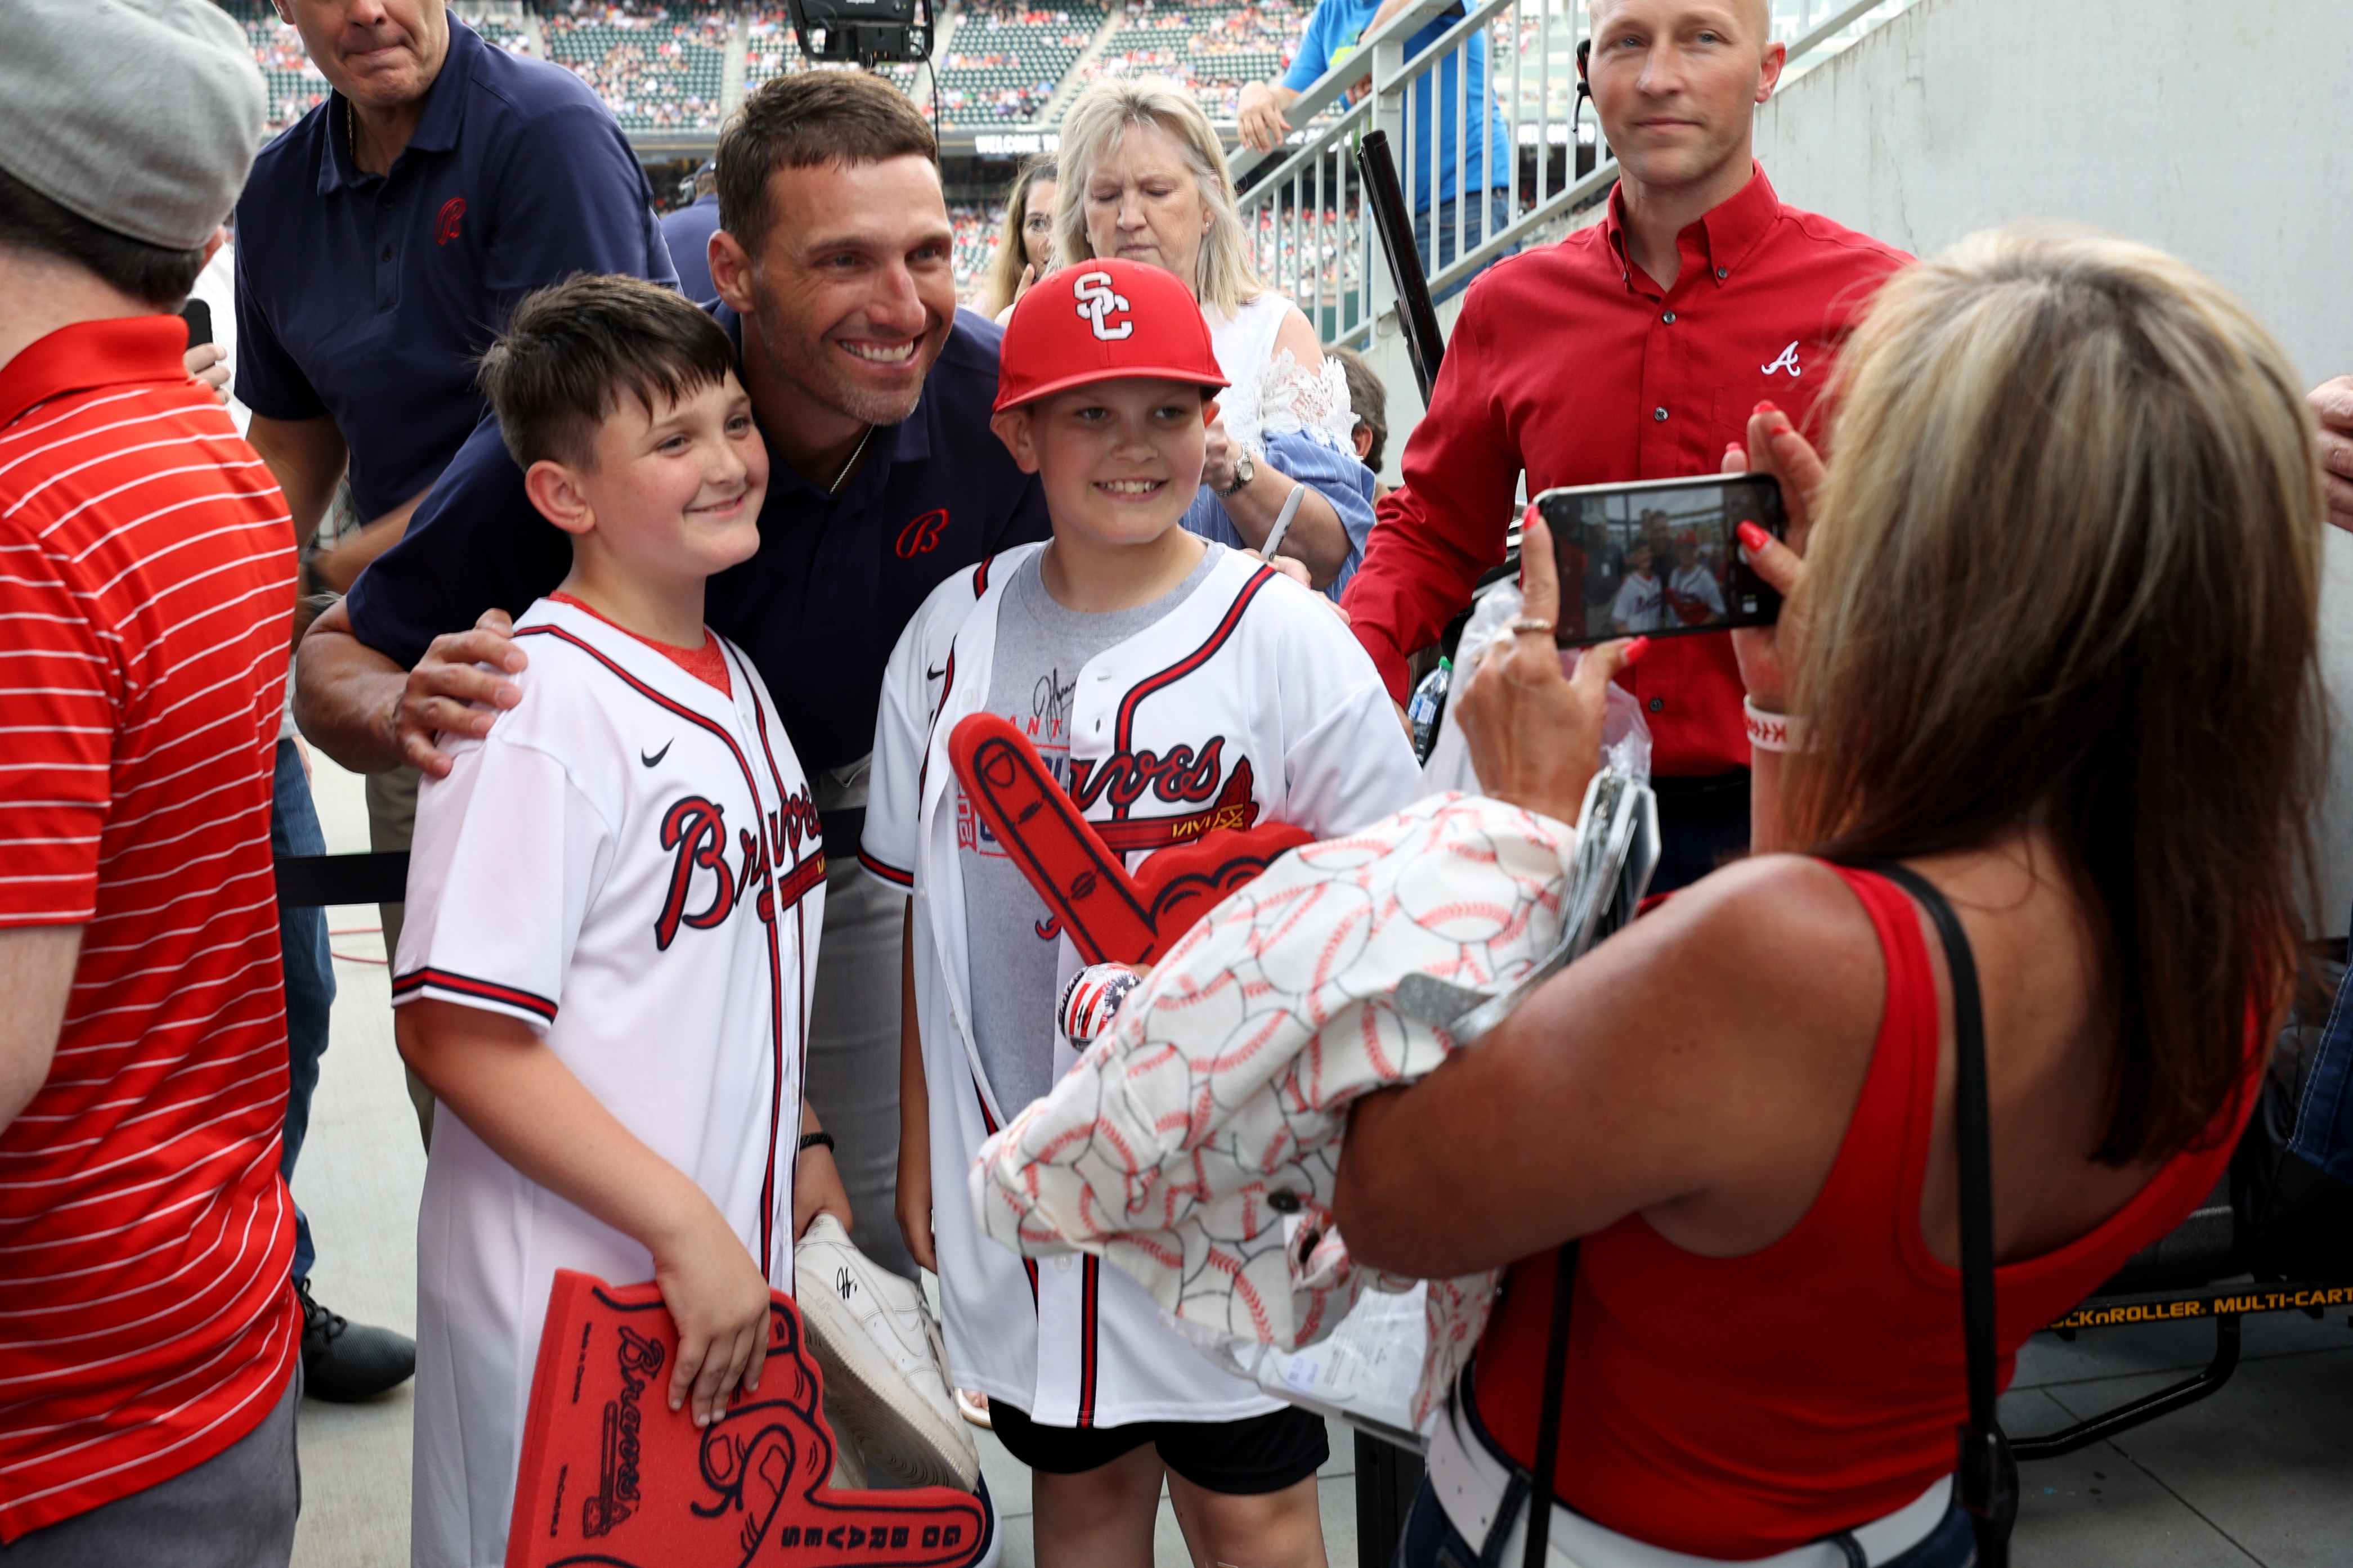 Jeff Francoeur will be back on Atlanta Braves telecasts this weekend